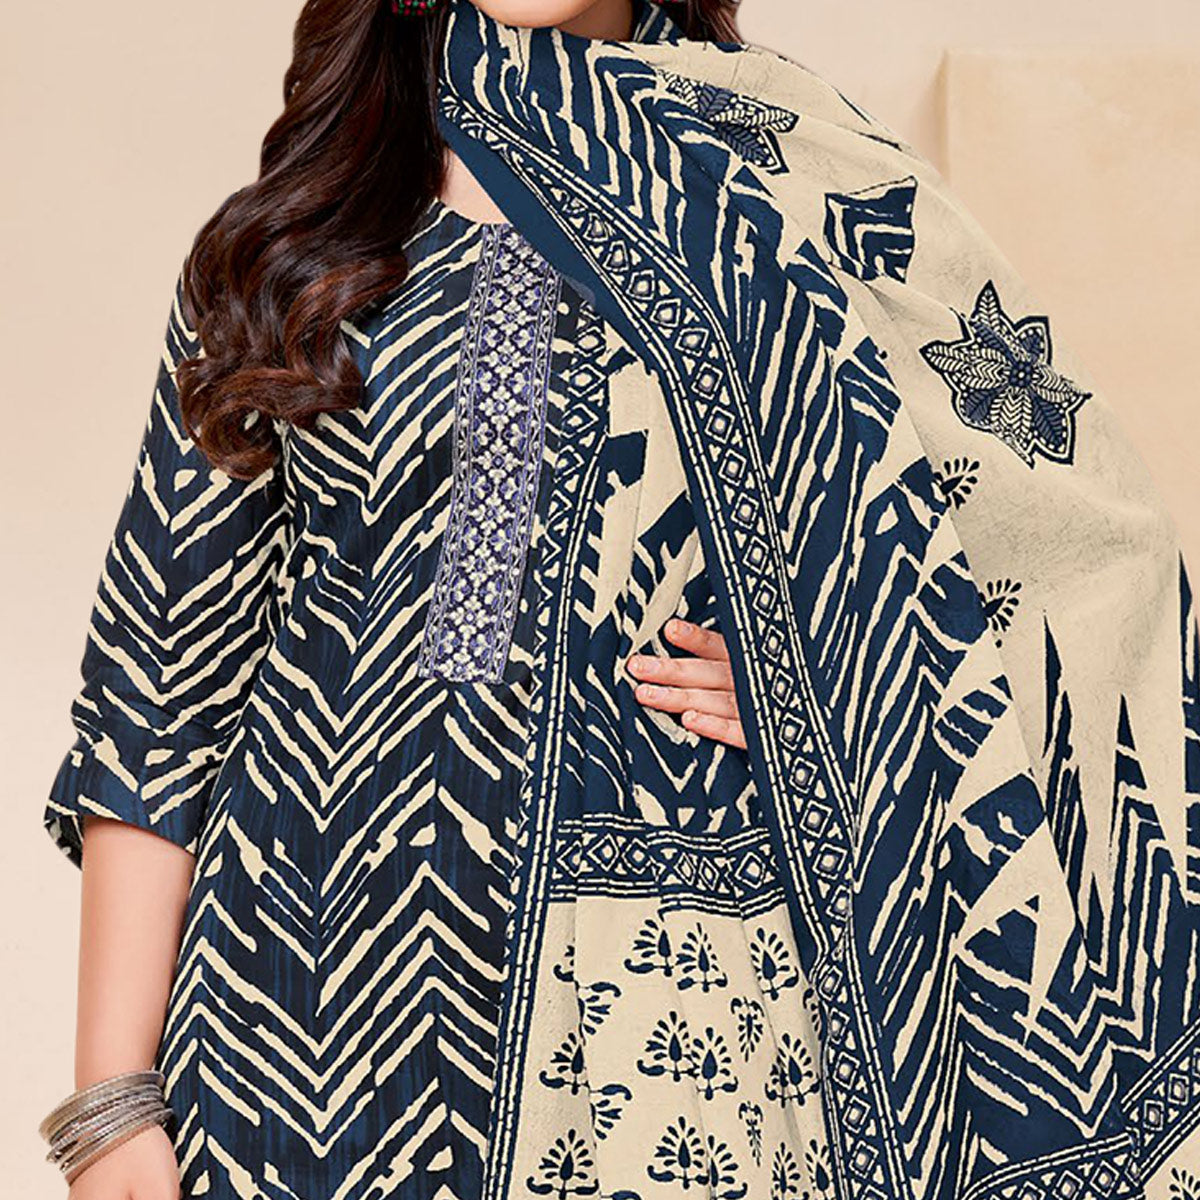 Blue Printed With Tie Embroidered Pure Cotton Suit